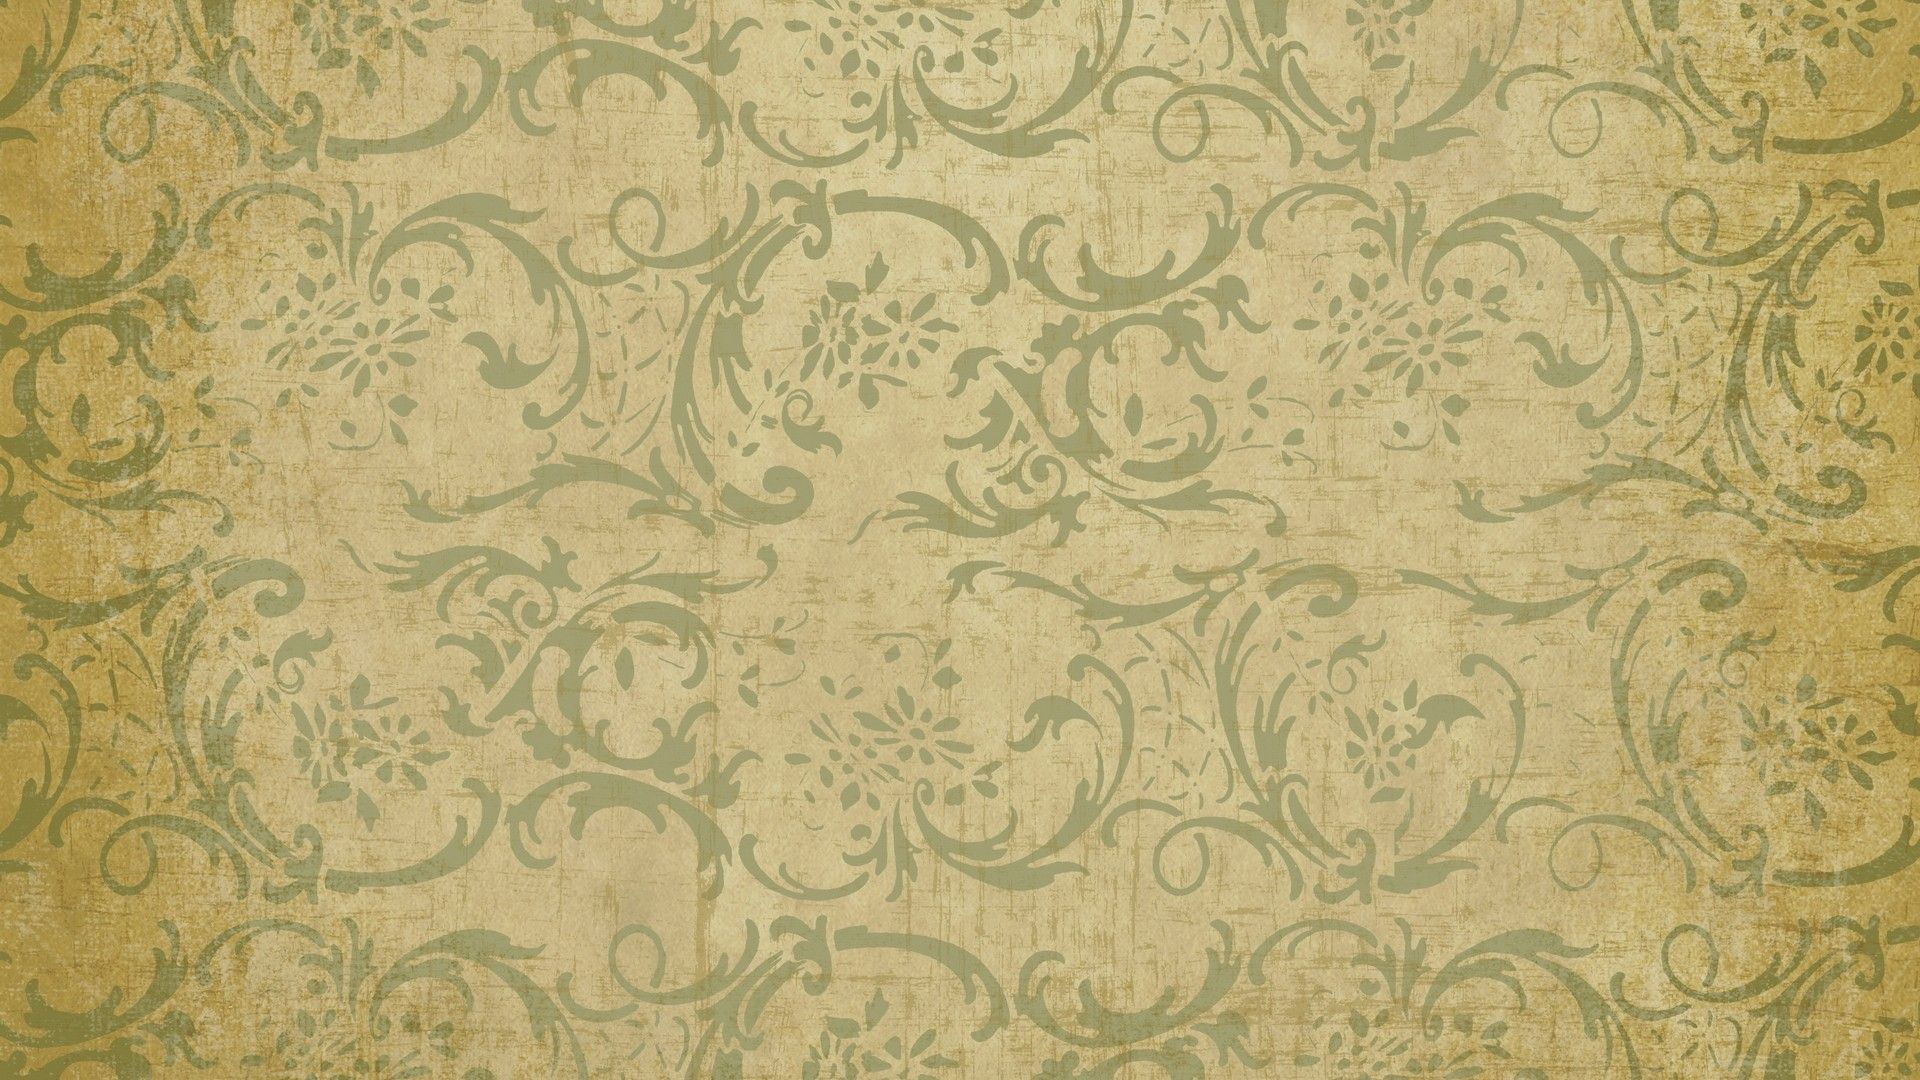 Texture High Definition Picture - Vintage Wallpaper Background - 1920x1080  Wallpaper 